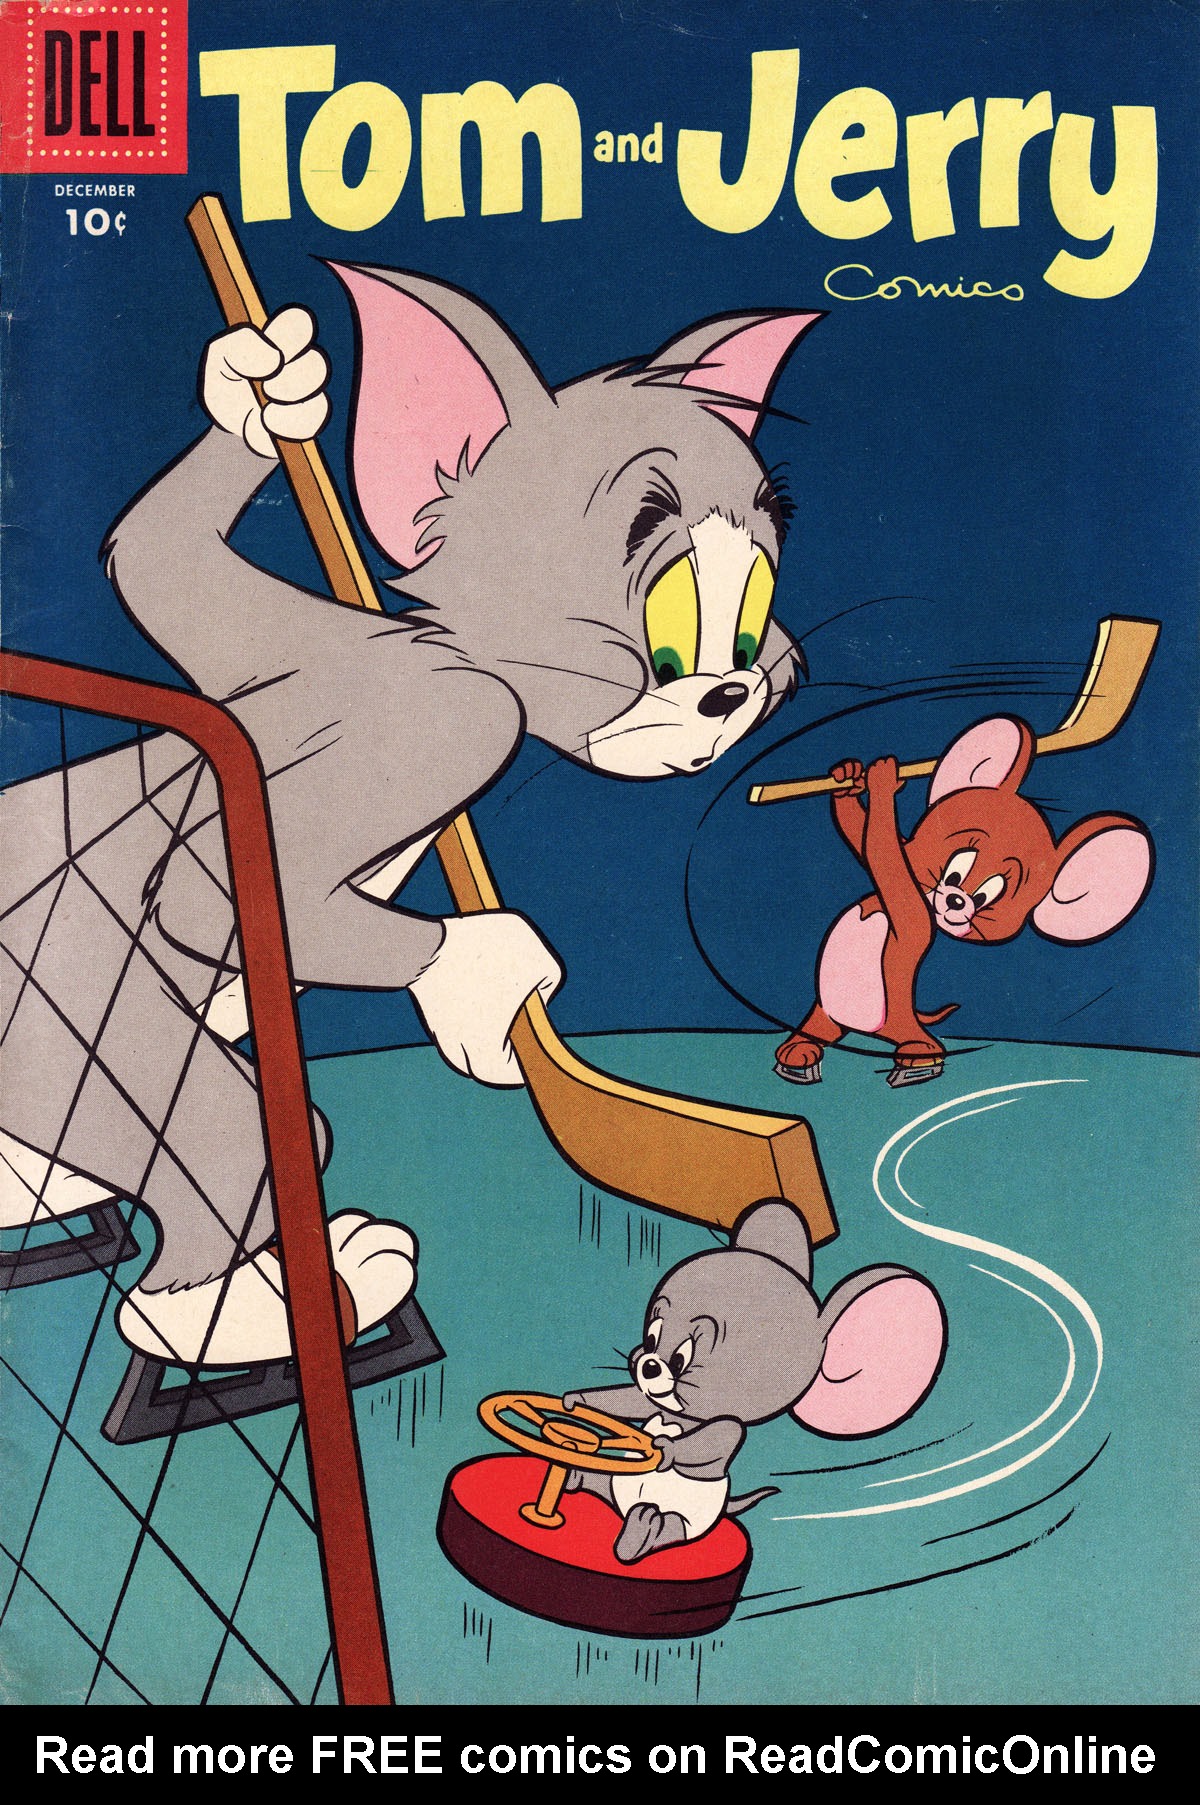 Tom Jerry Comics Issue 137 | Read Tom Jerry Comics Issue 137 comic online  in high quality. Read Full Comic online for free - Read comics online in  high quality .| READ COMIC ONLINE